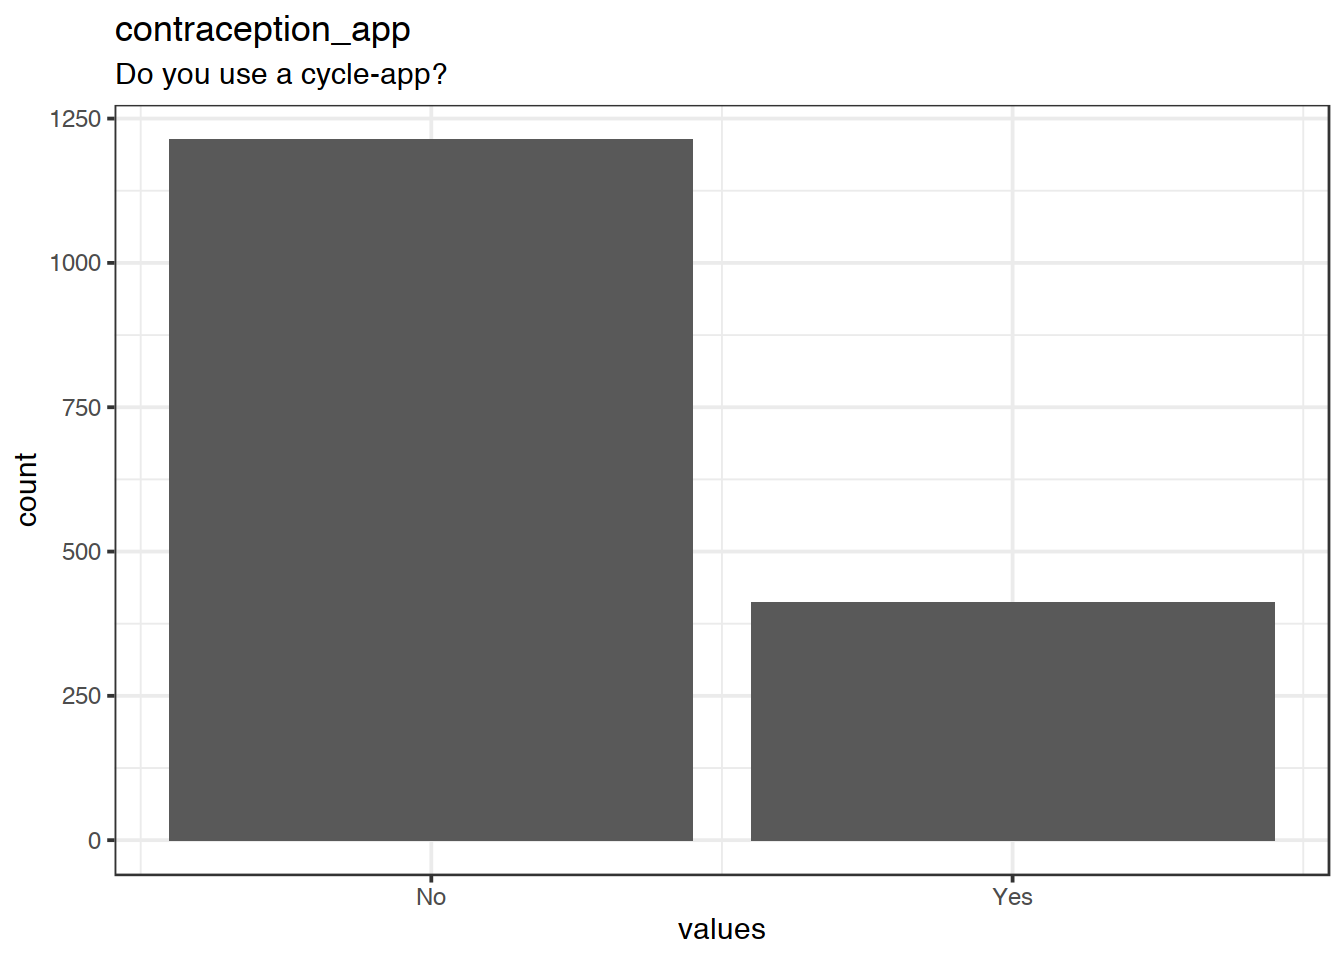 Distribution of values for contraception_app